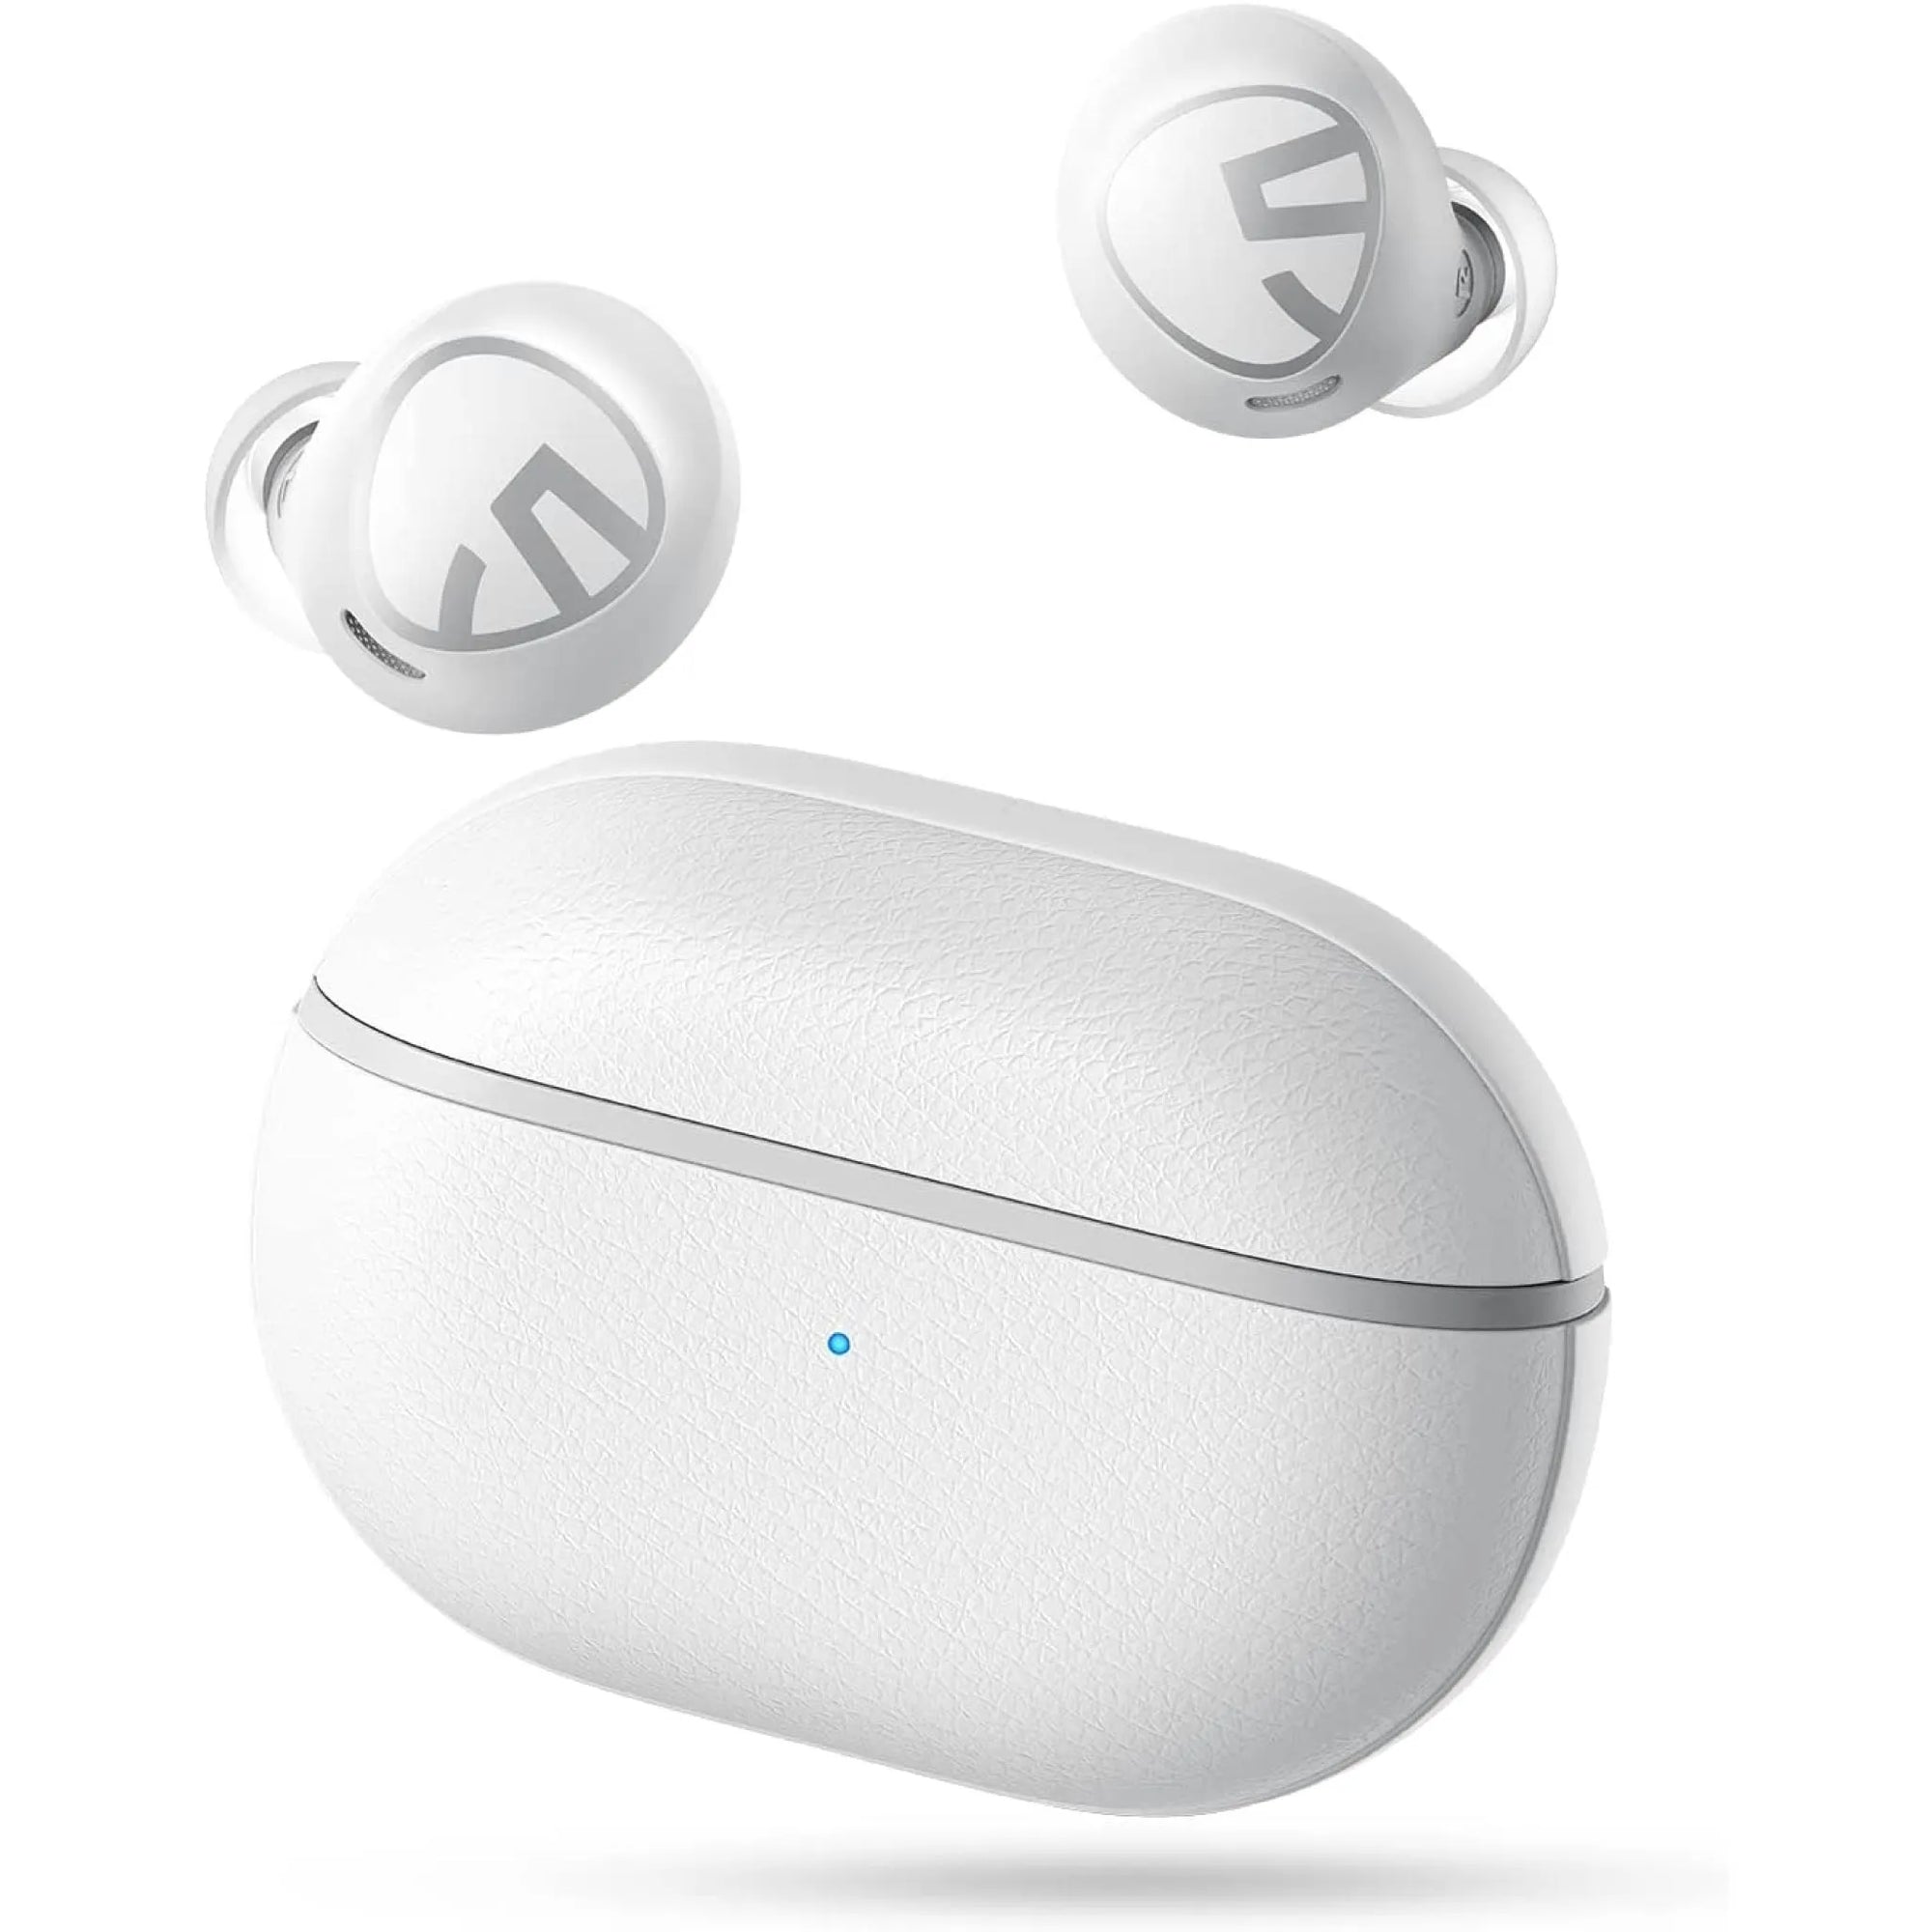 Soundpeats TrueAir2 Wireless Earbuds White Online at Best Price, Mobile  Hands Free